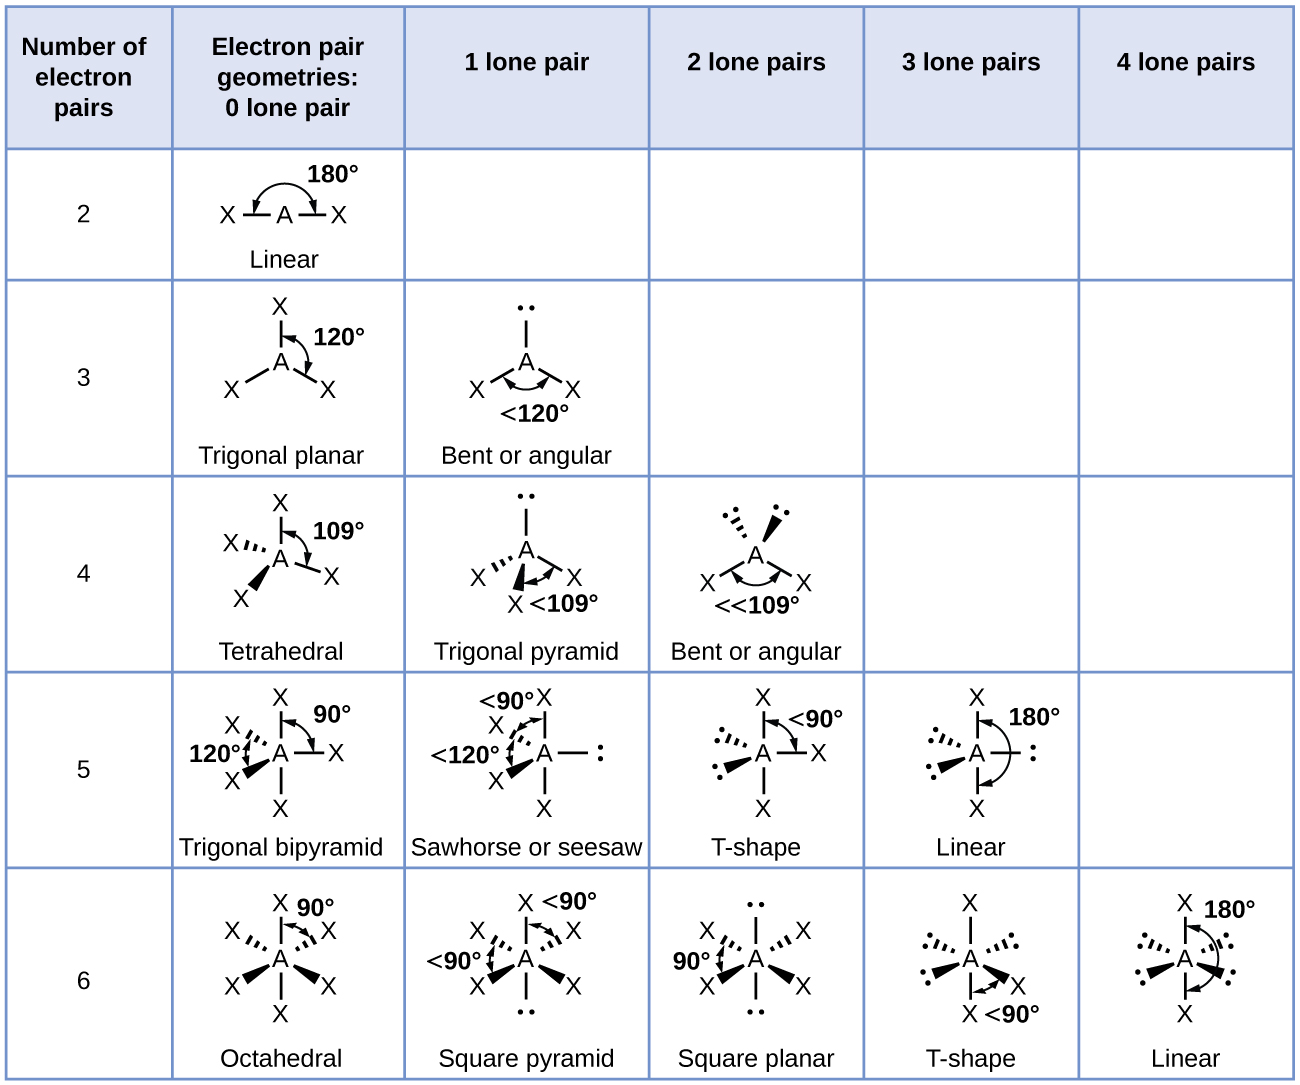 Figure 2.6.6 - The molecular structures are identical to the electron-pair geometries...